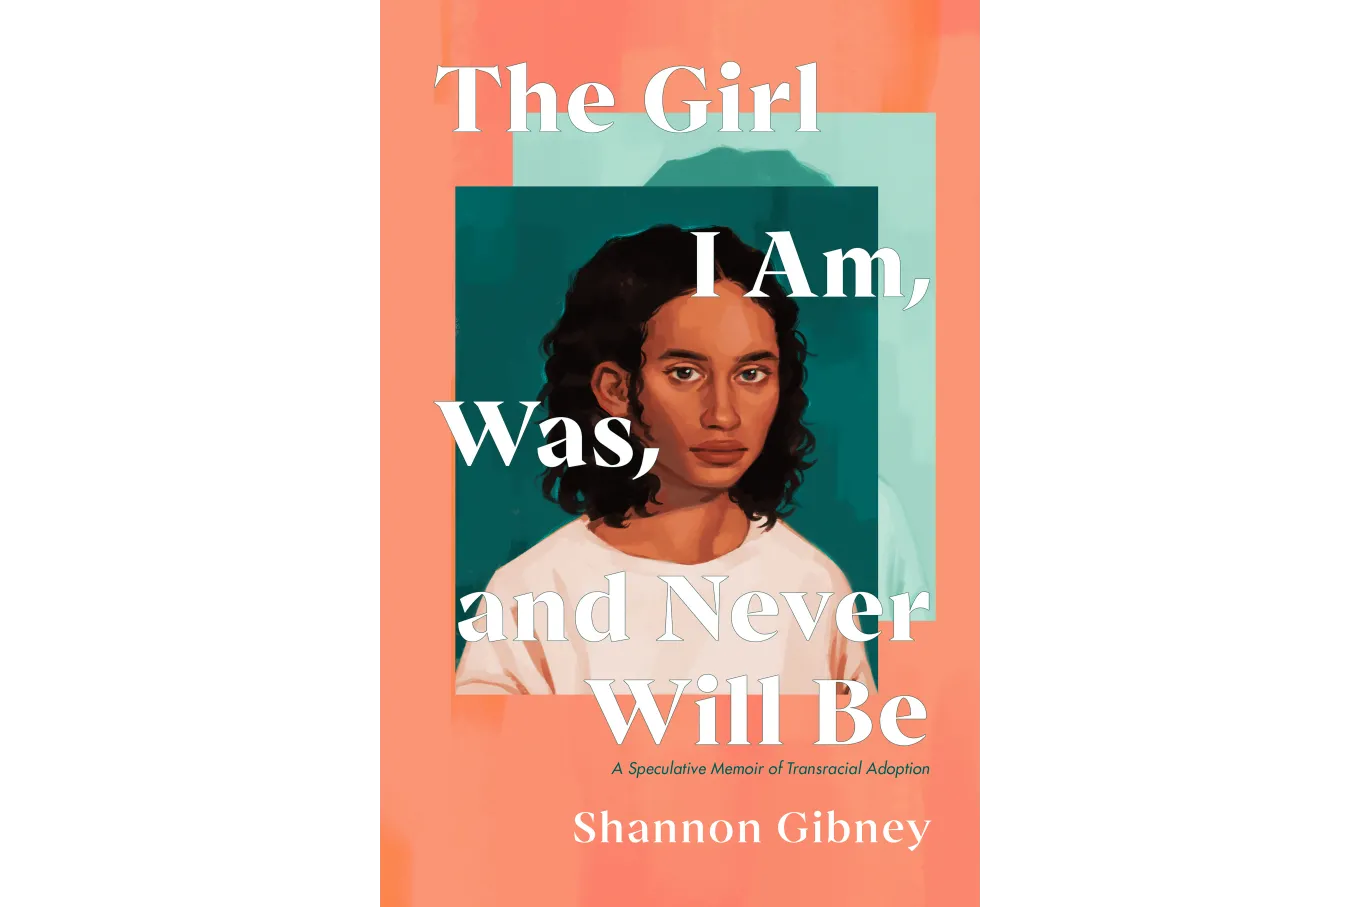 The Cover of the girl I am, was, and never will be